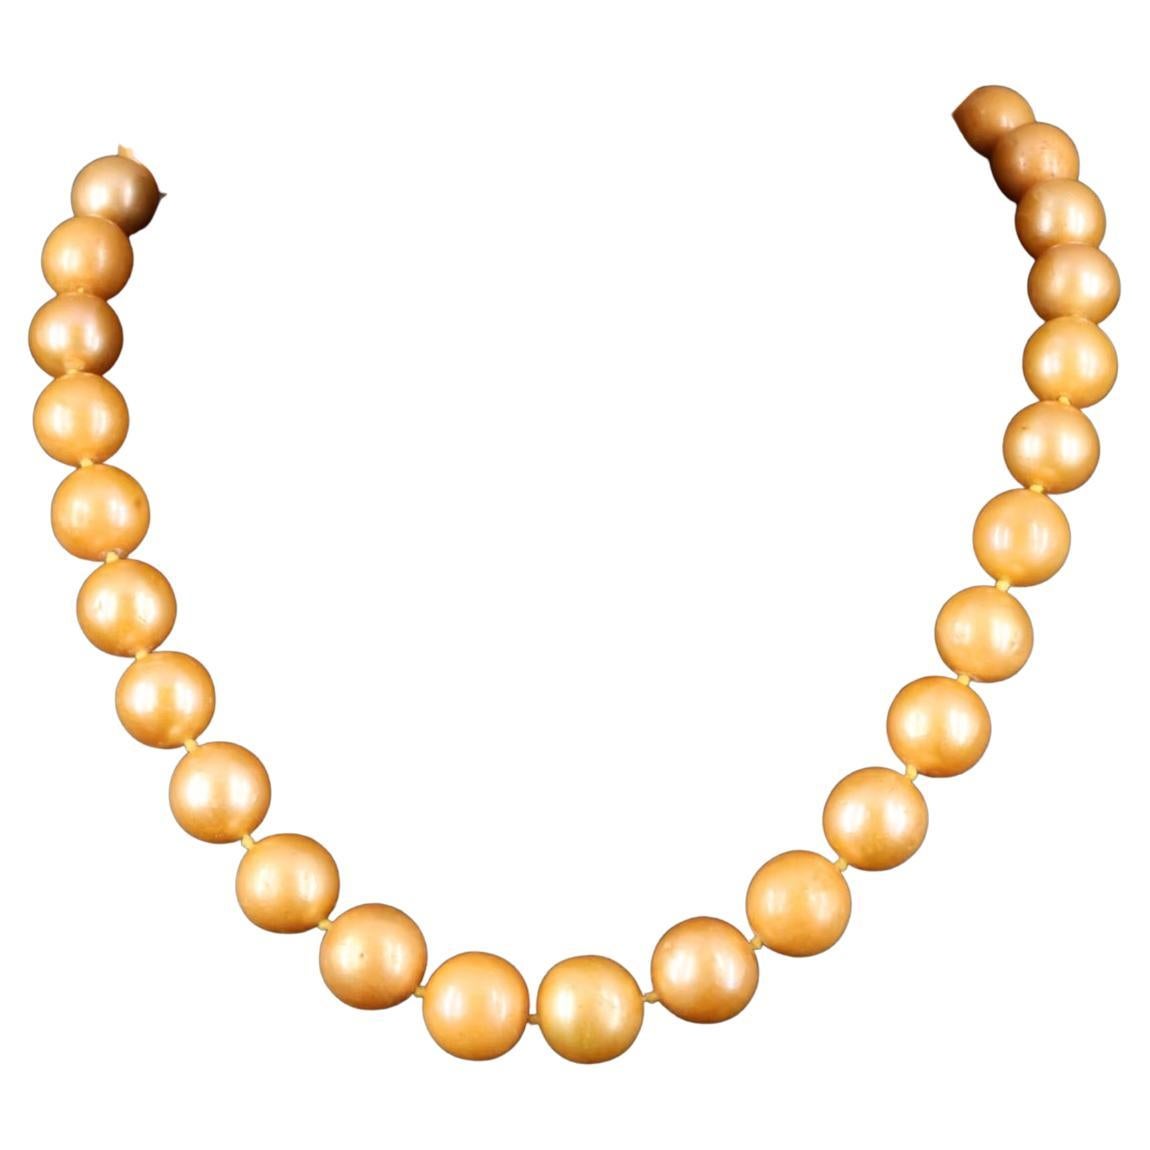 NEW / GIA certified Large Pearl Necklace / 18K Gold / Comes with GIA certificate